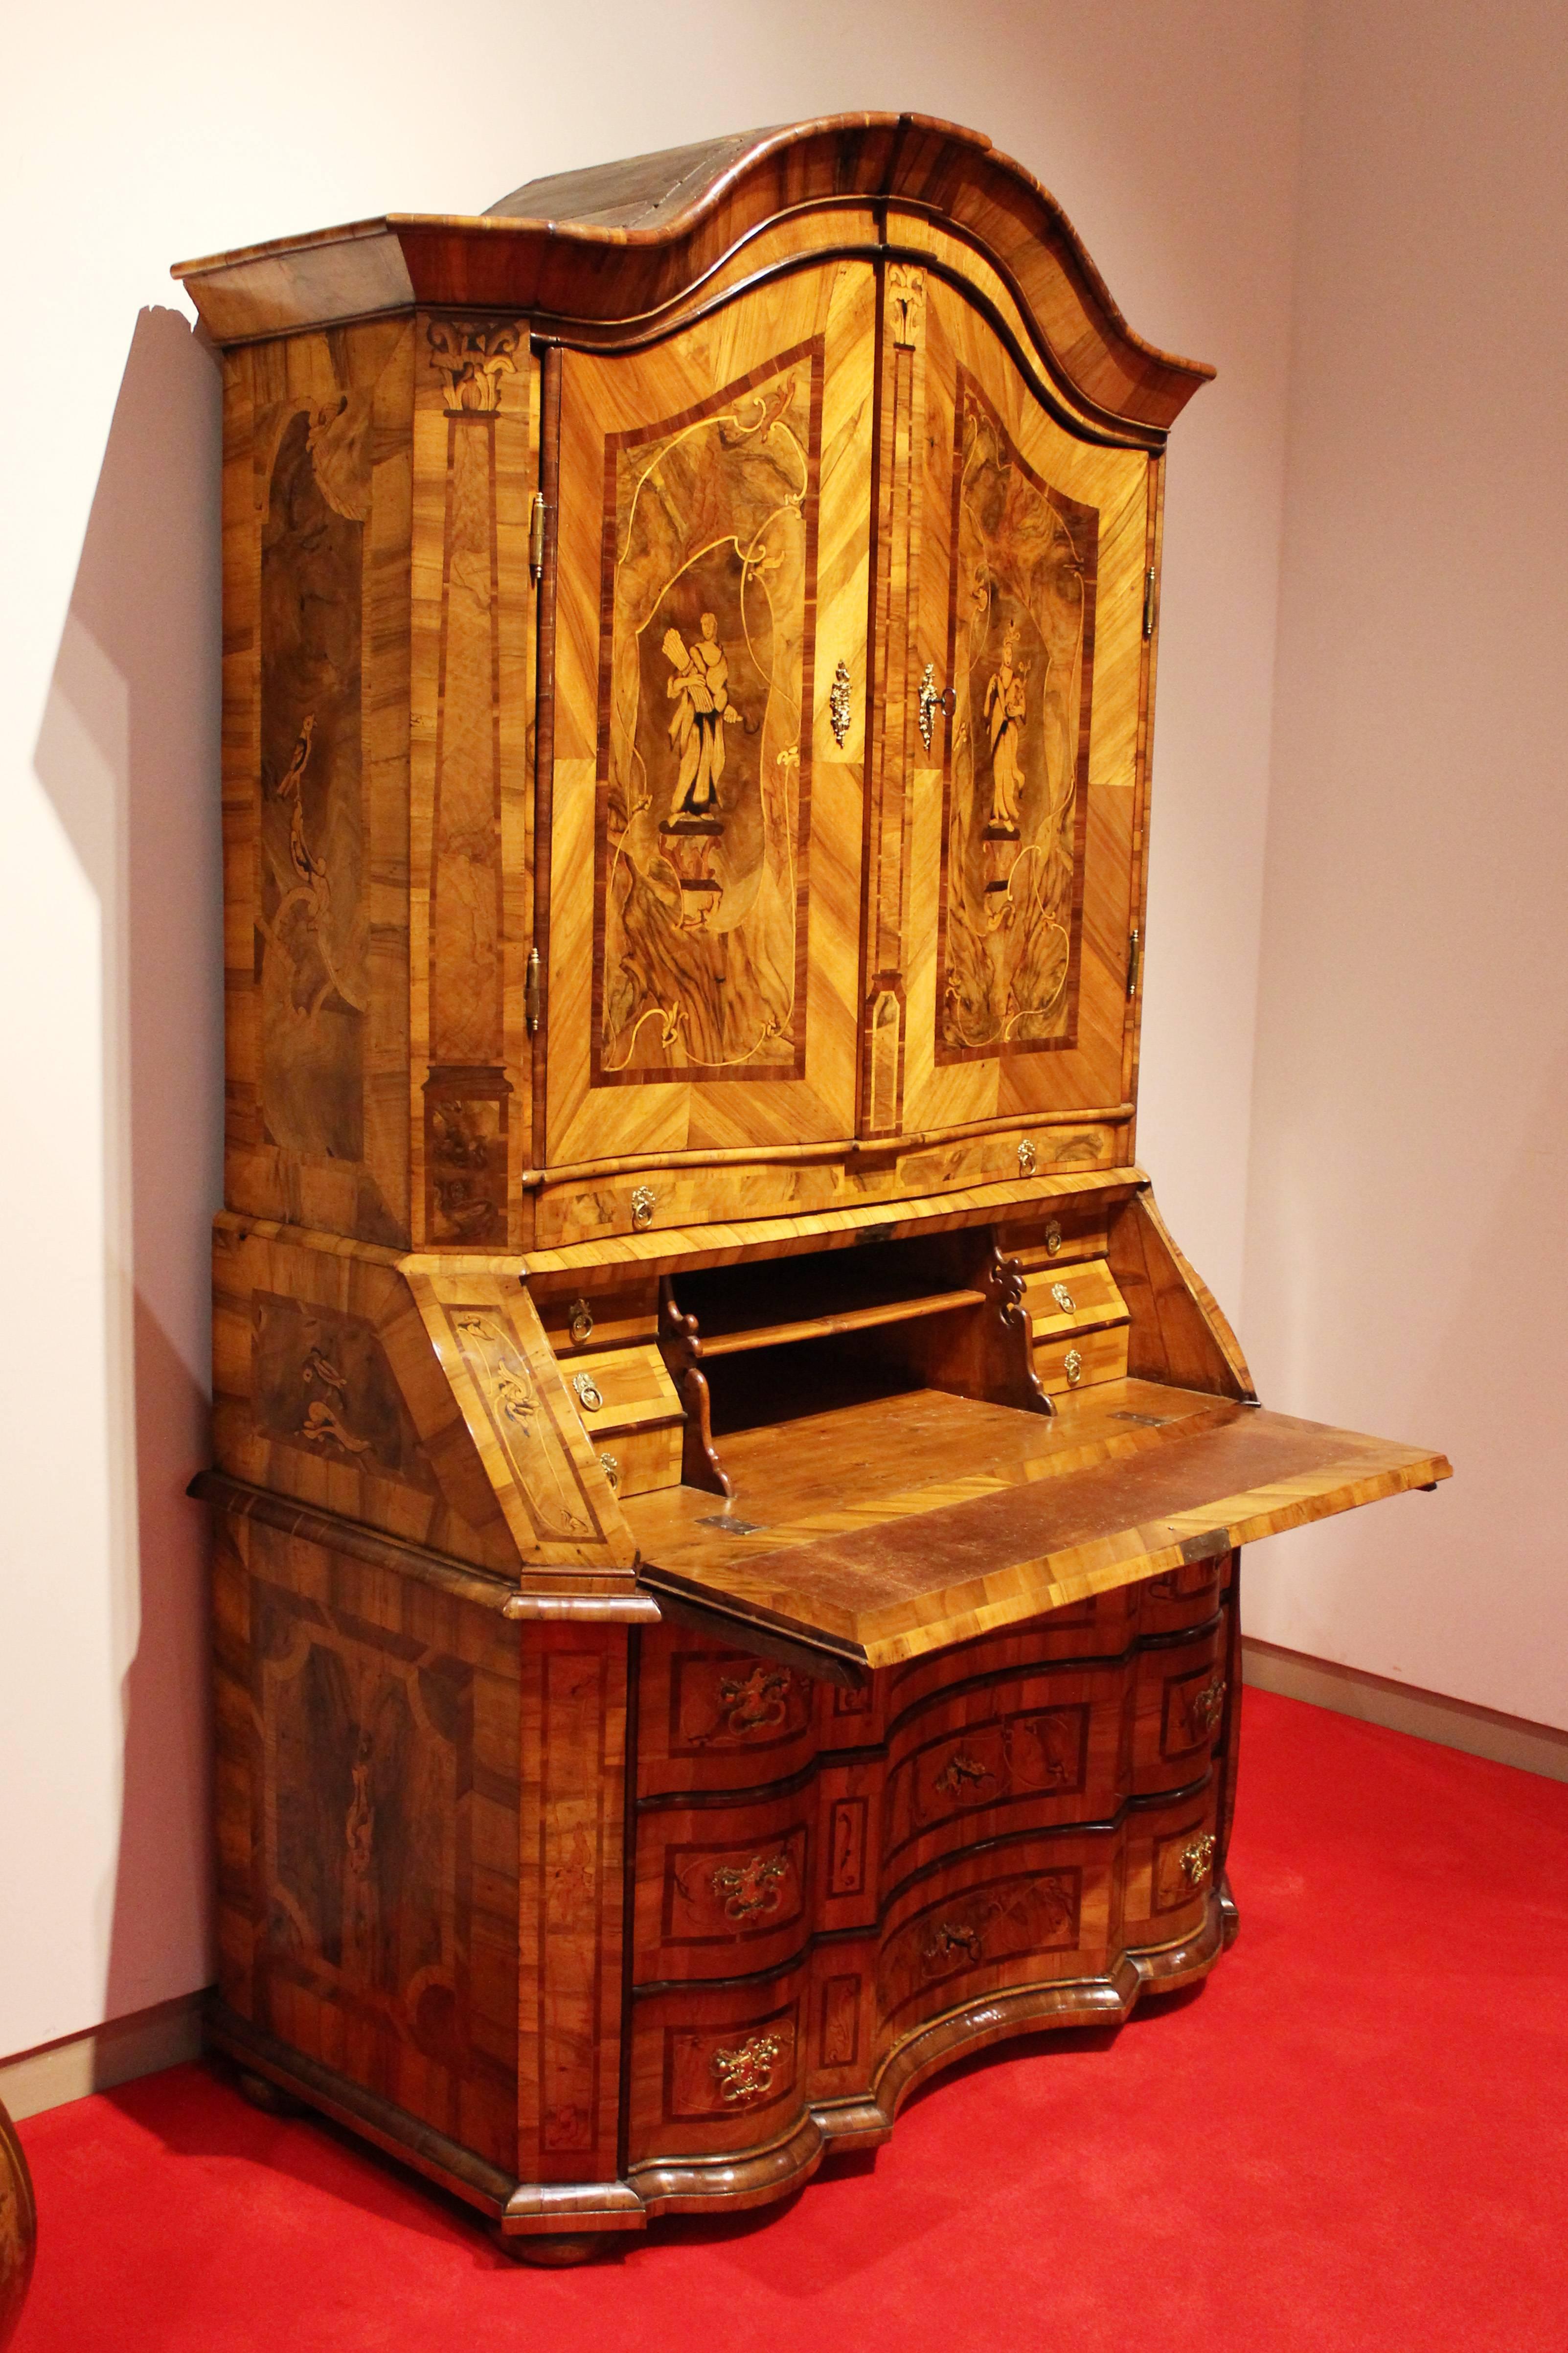 Walnut-tree and walnut-tree root on softwood body.
Several times curved drag.
Six drawers behind the writing record.
Bulged out upper top with two doors and 12 small drawers and shelf
Rich figurale and florale inlaid works. 
Four Seasons are